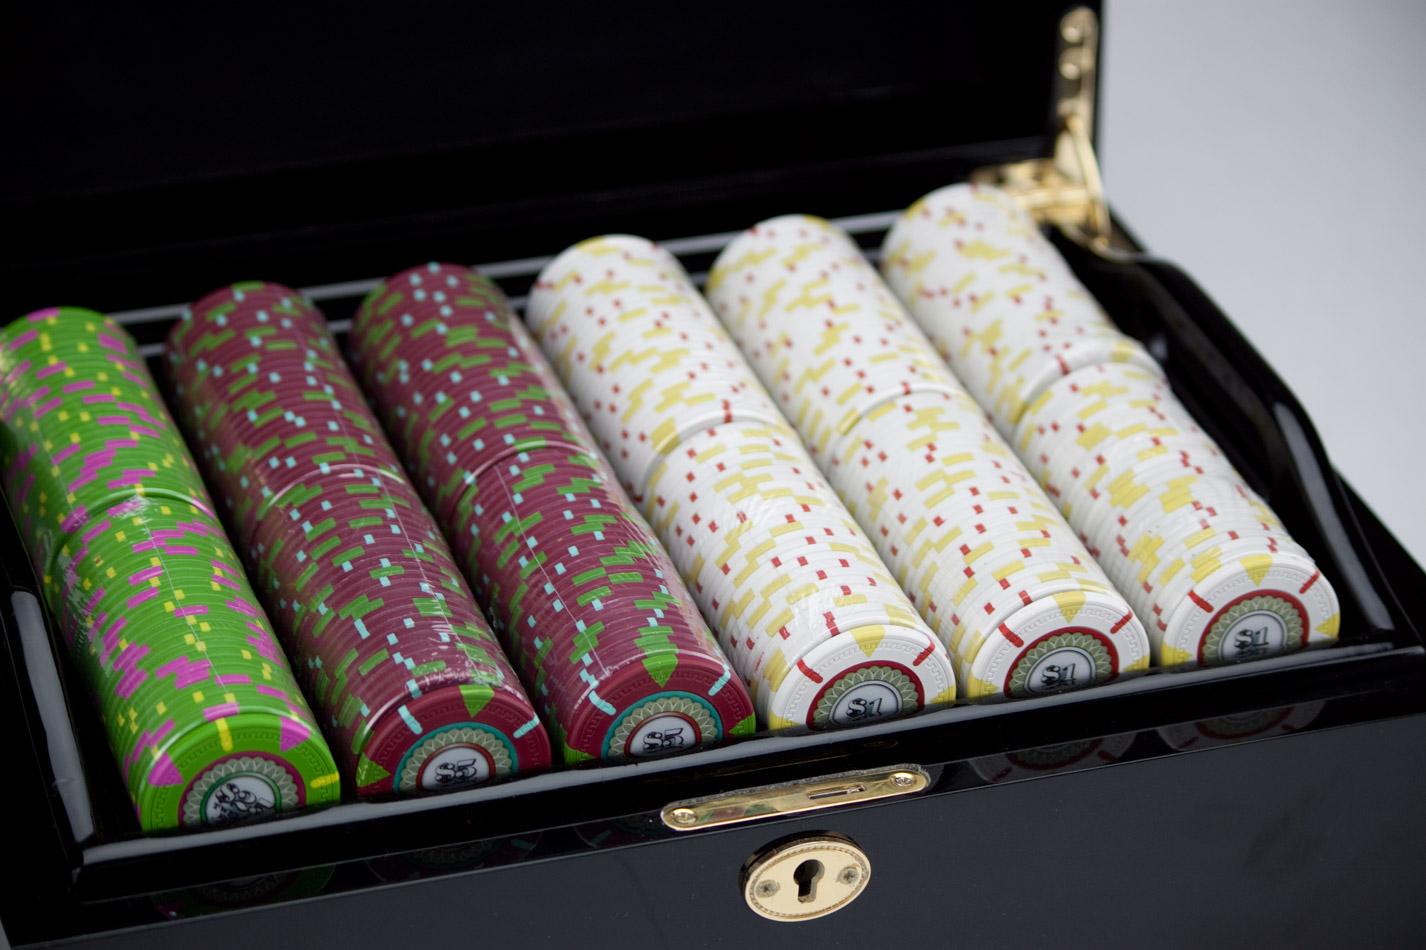 500 Mint Poker Chips with Mahogany Case